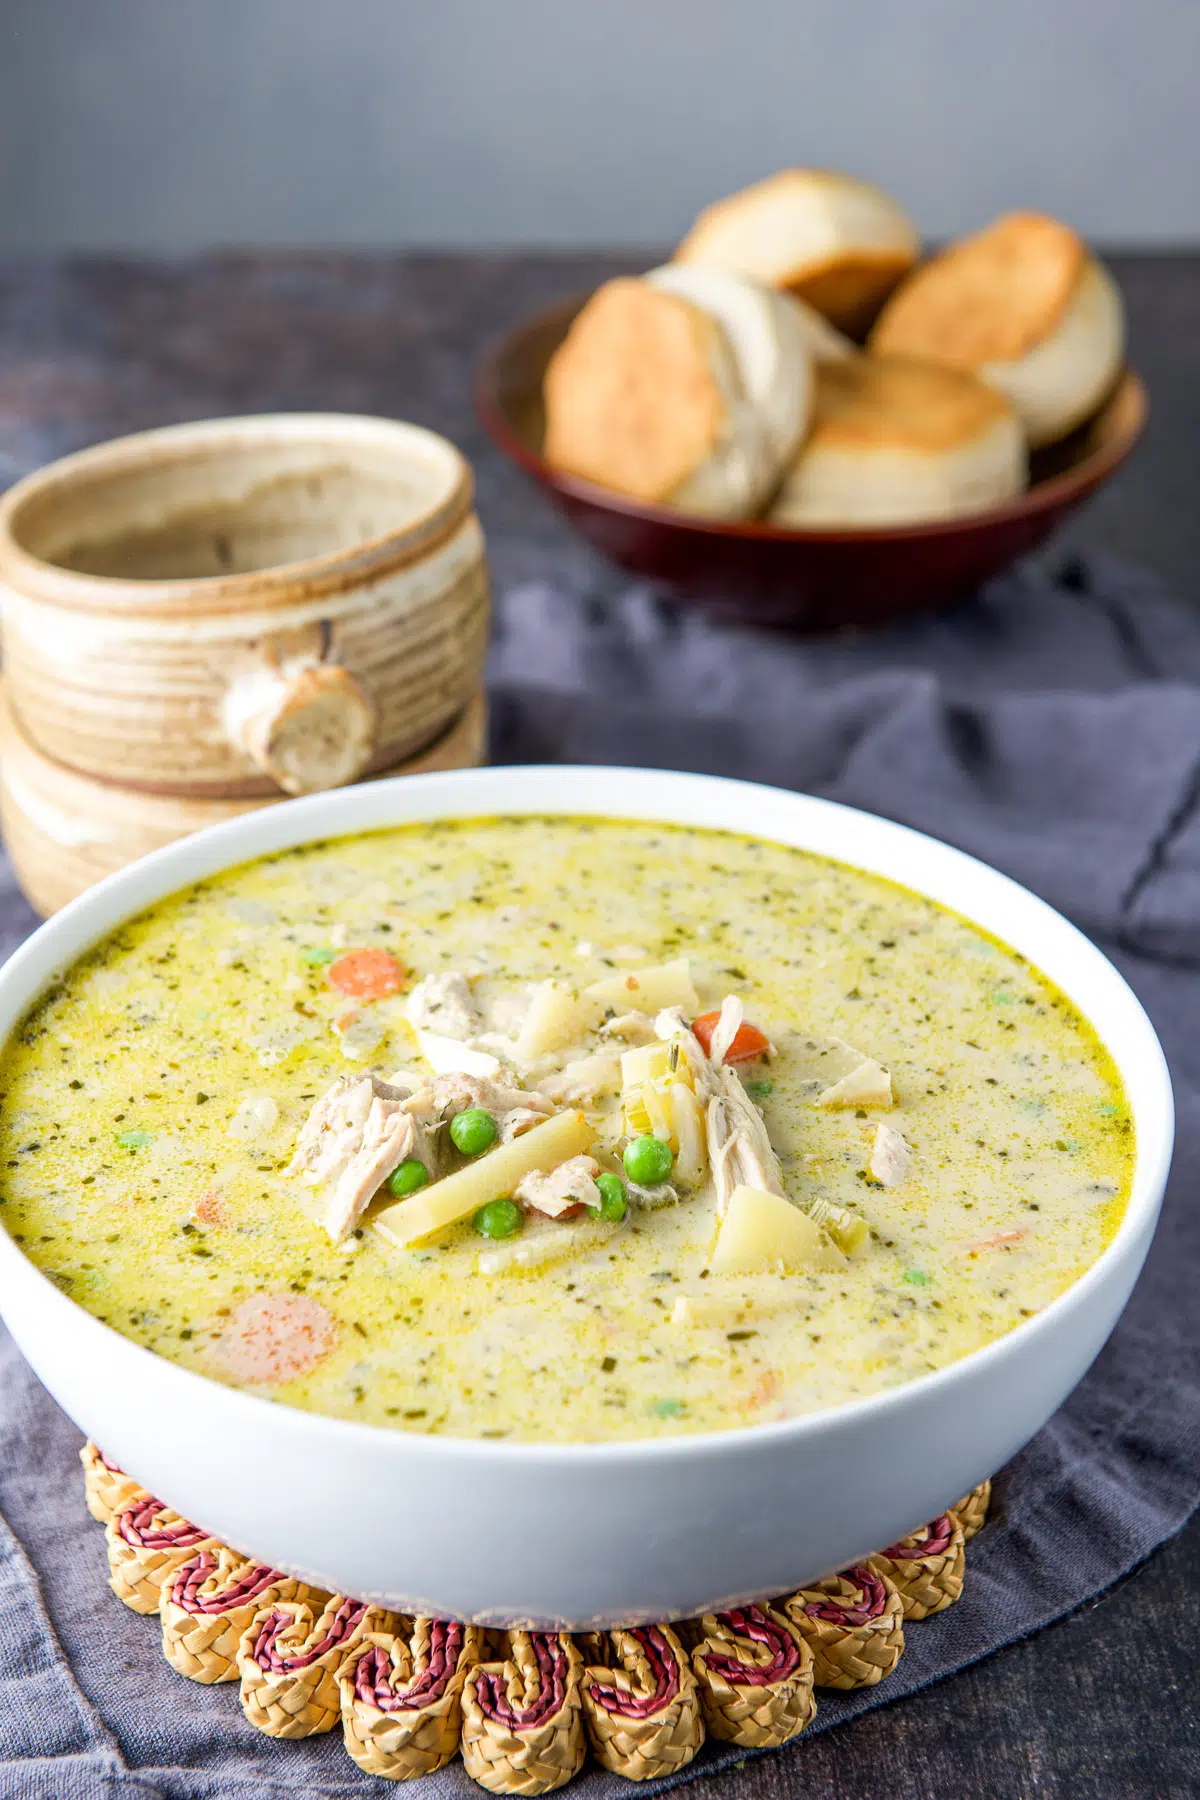 Large white bowl filled with the creamy chicken soup with crocks and biscuits in back